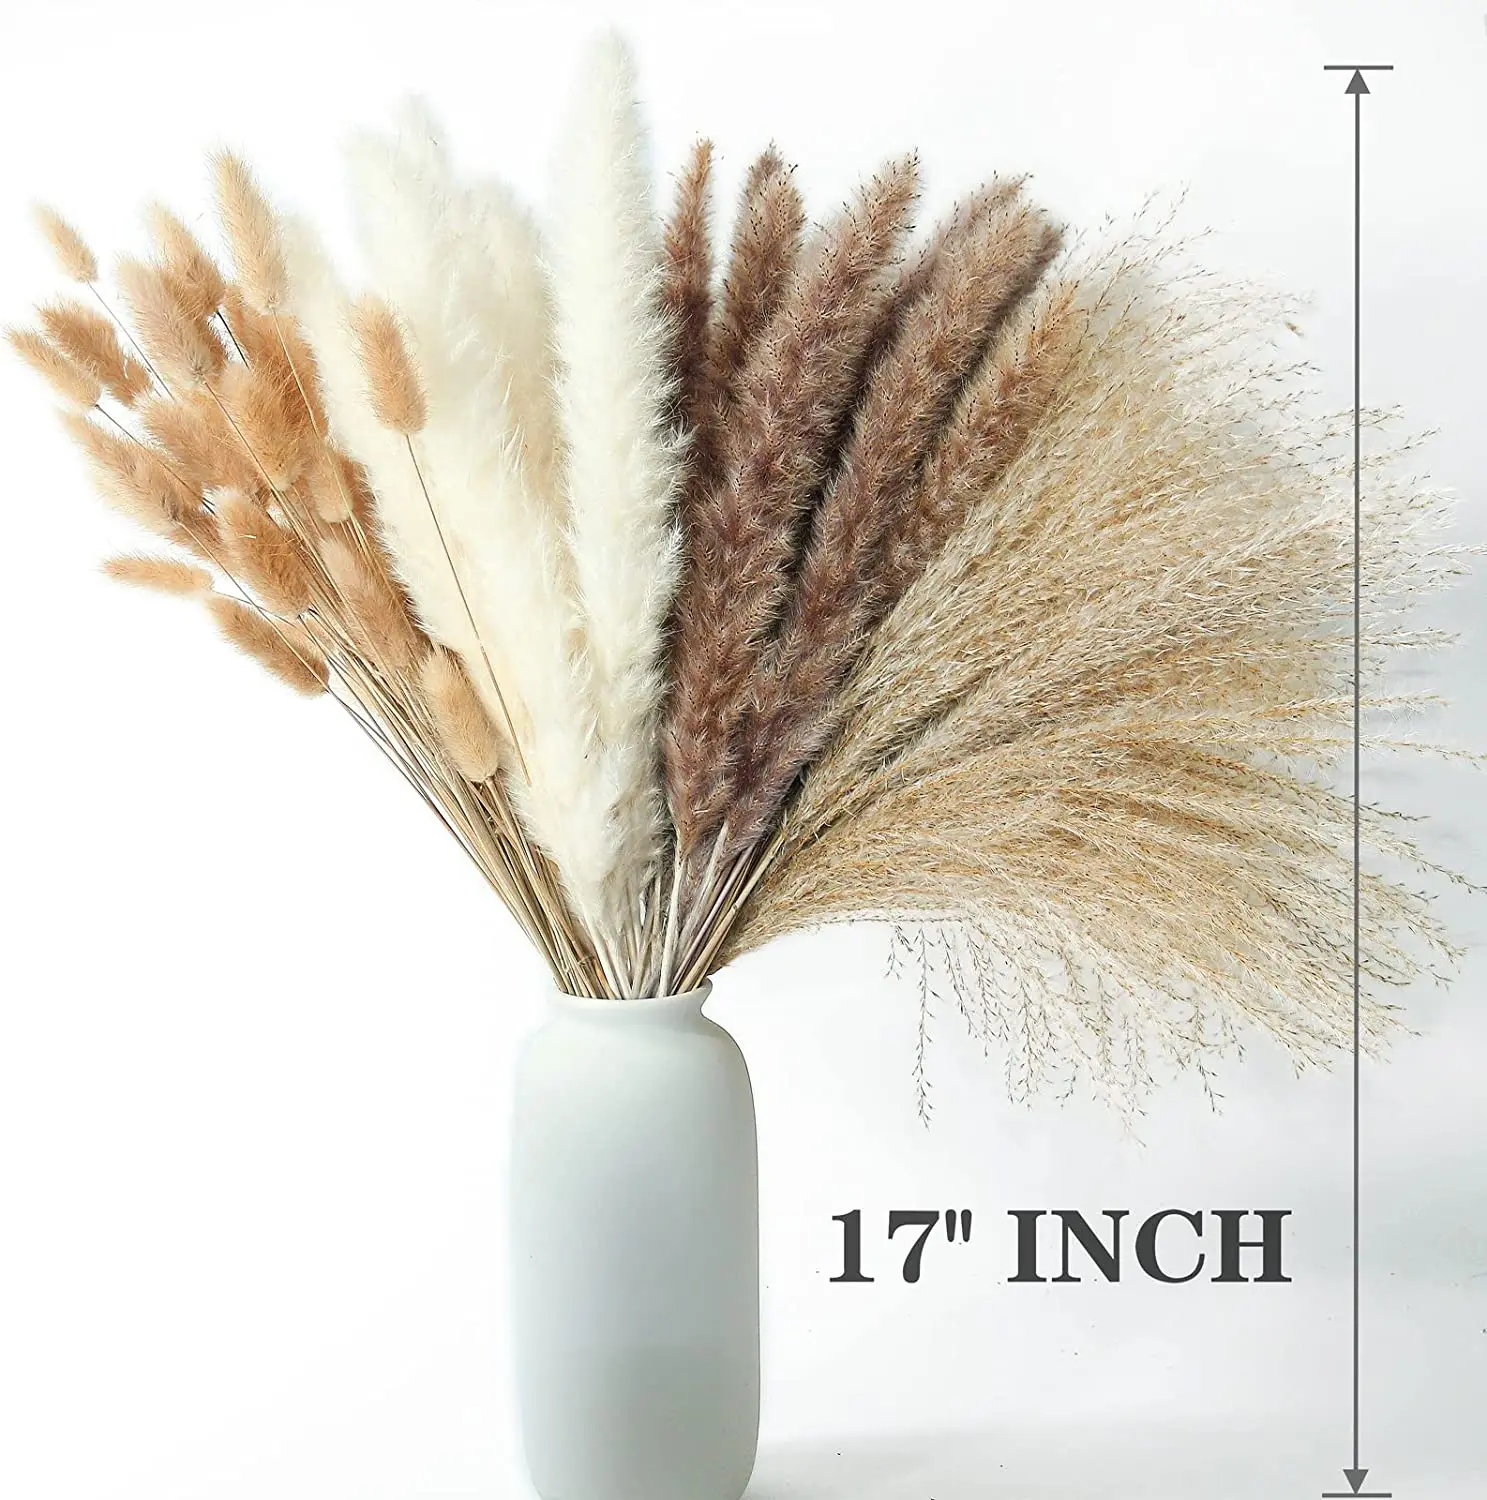 

100 PCS Dried Pampas Grass ,Contains Bunny Tails Dried Flowers,Reed Grass Bouquet for Wedding Boho Flowers Home Table Decor